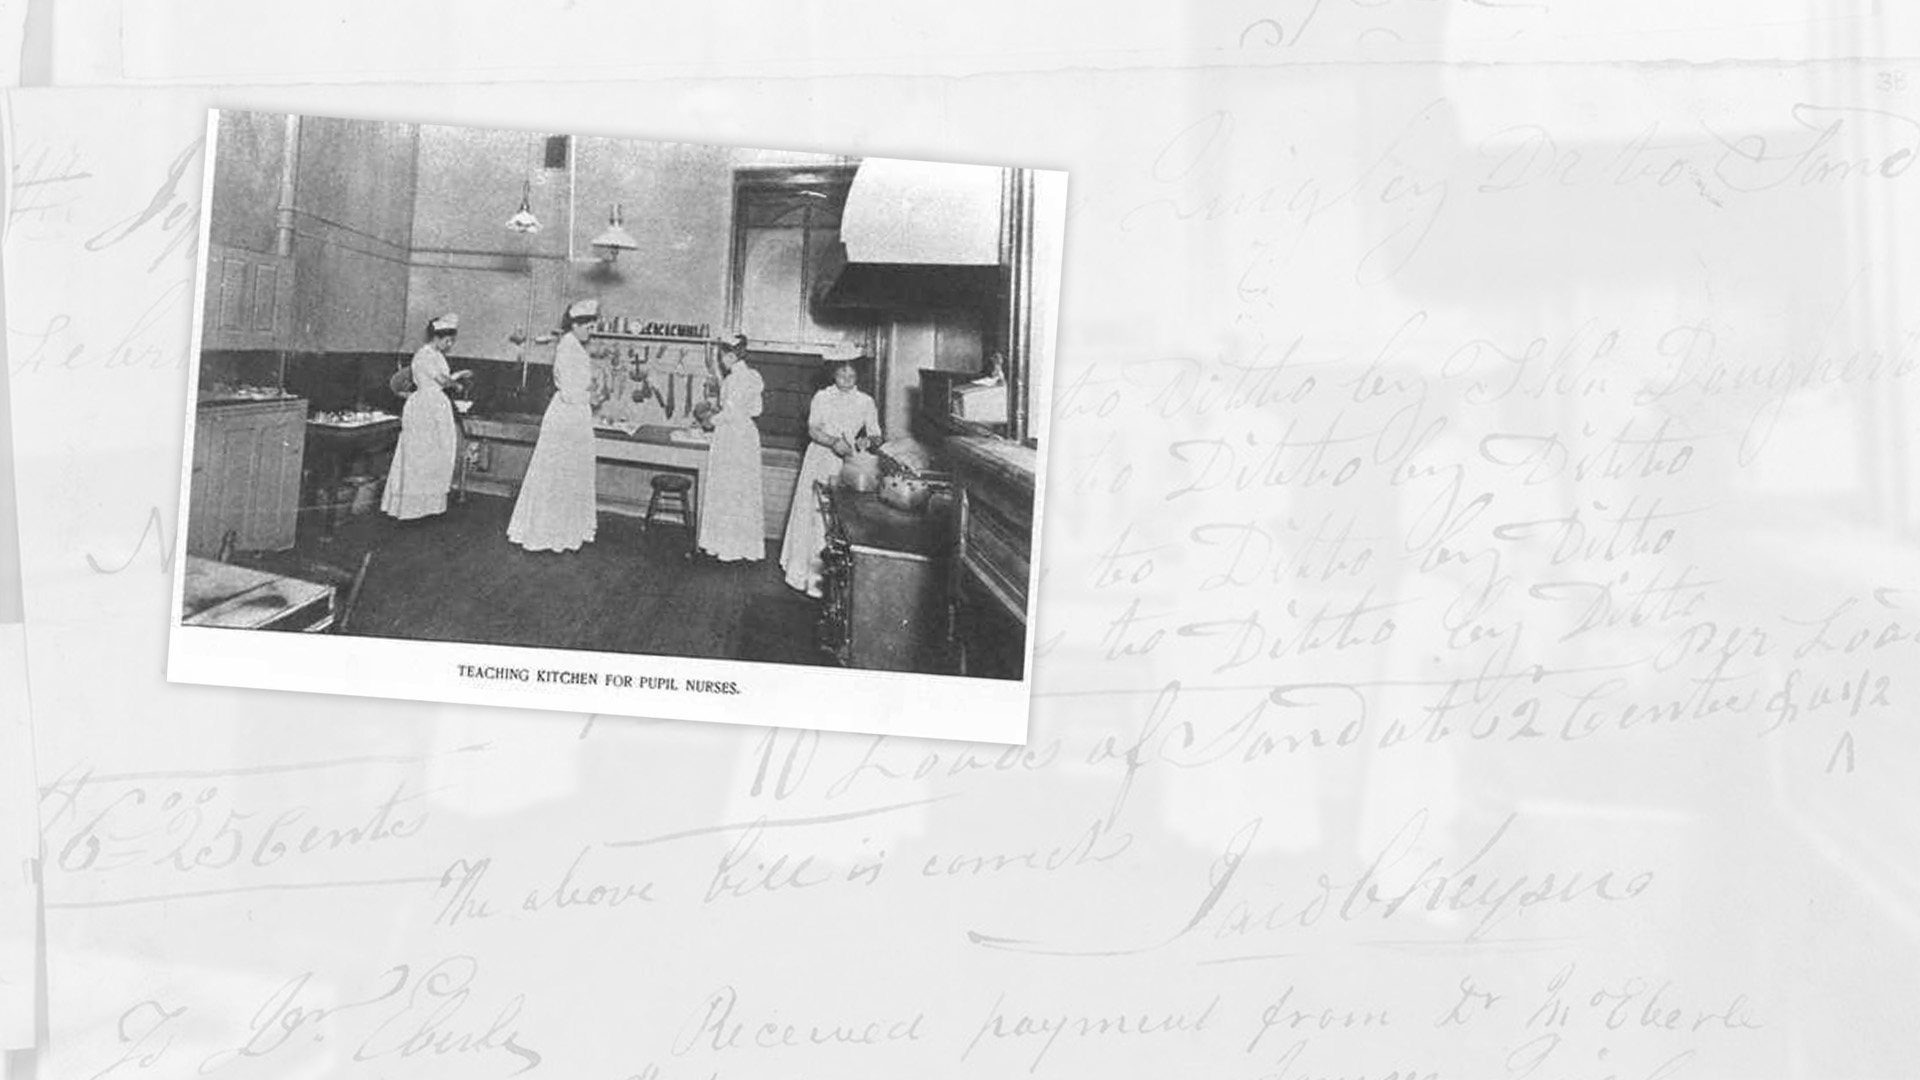 Interior view showing four student nurses preparing meals in the teaching kitchen of the 1877 Hospital.